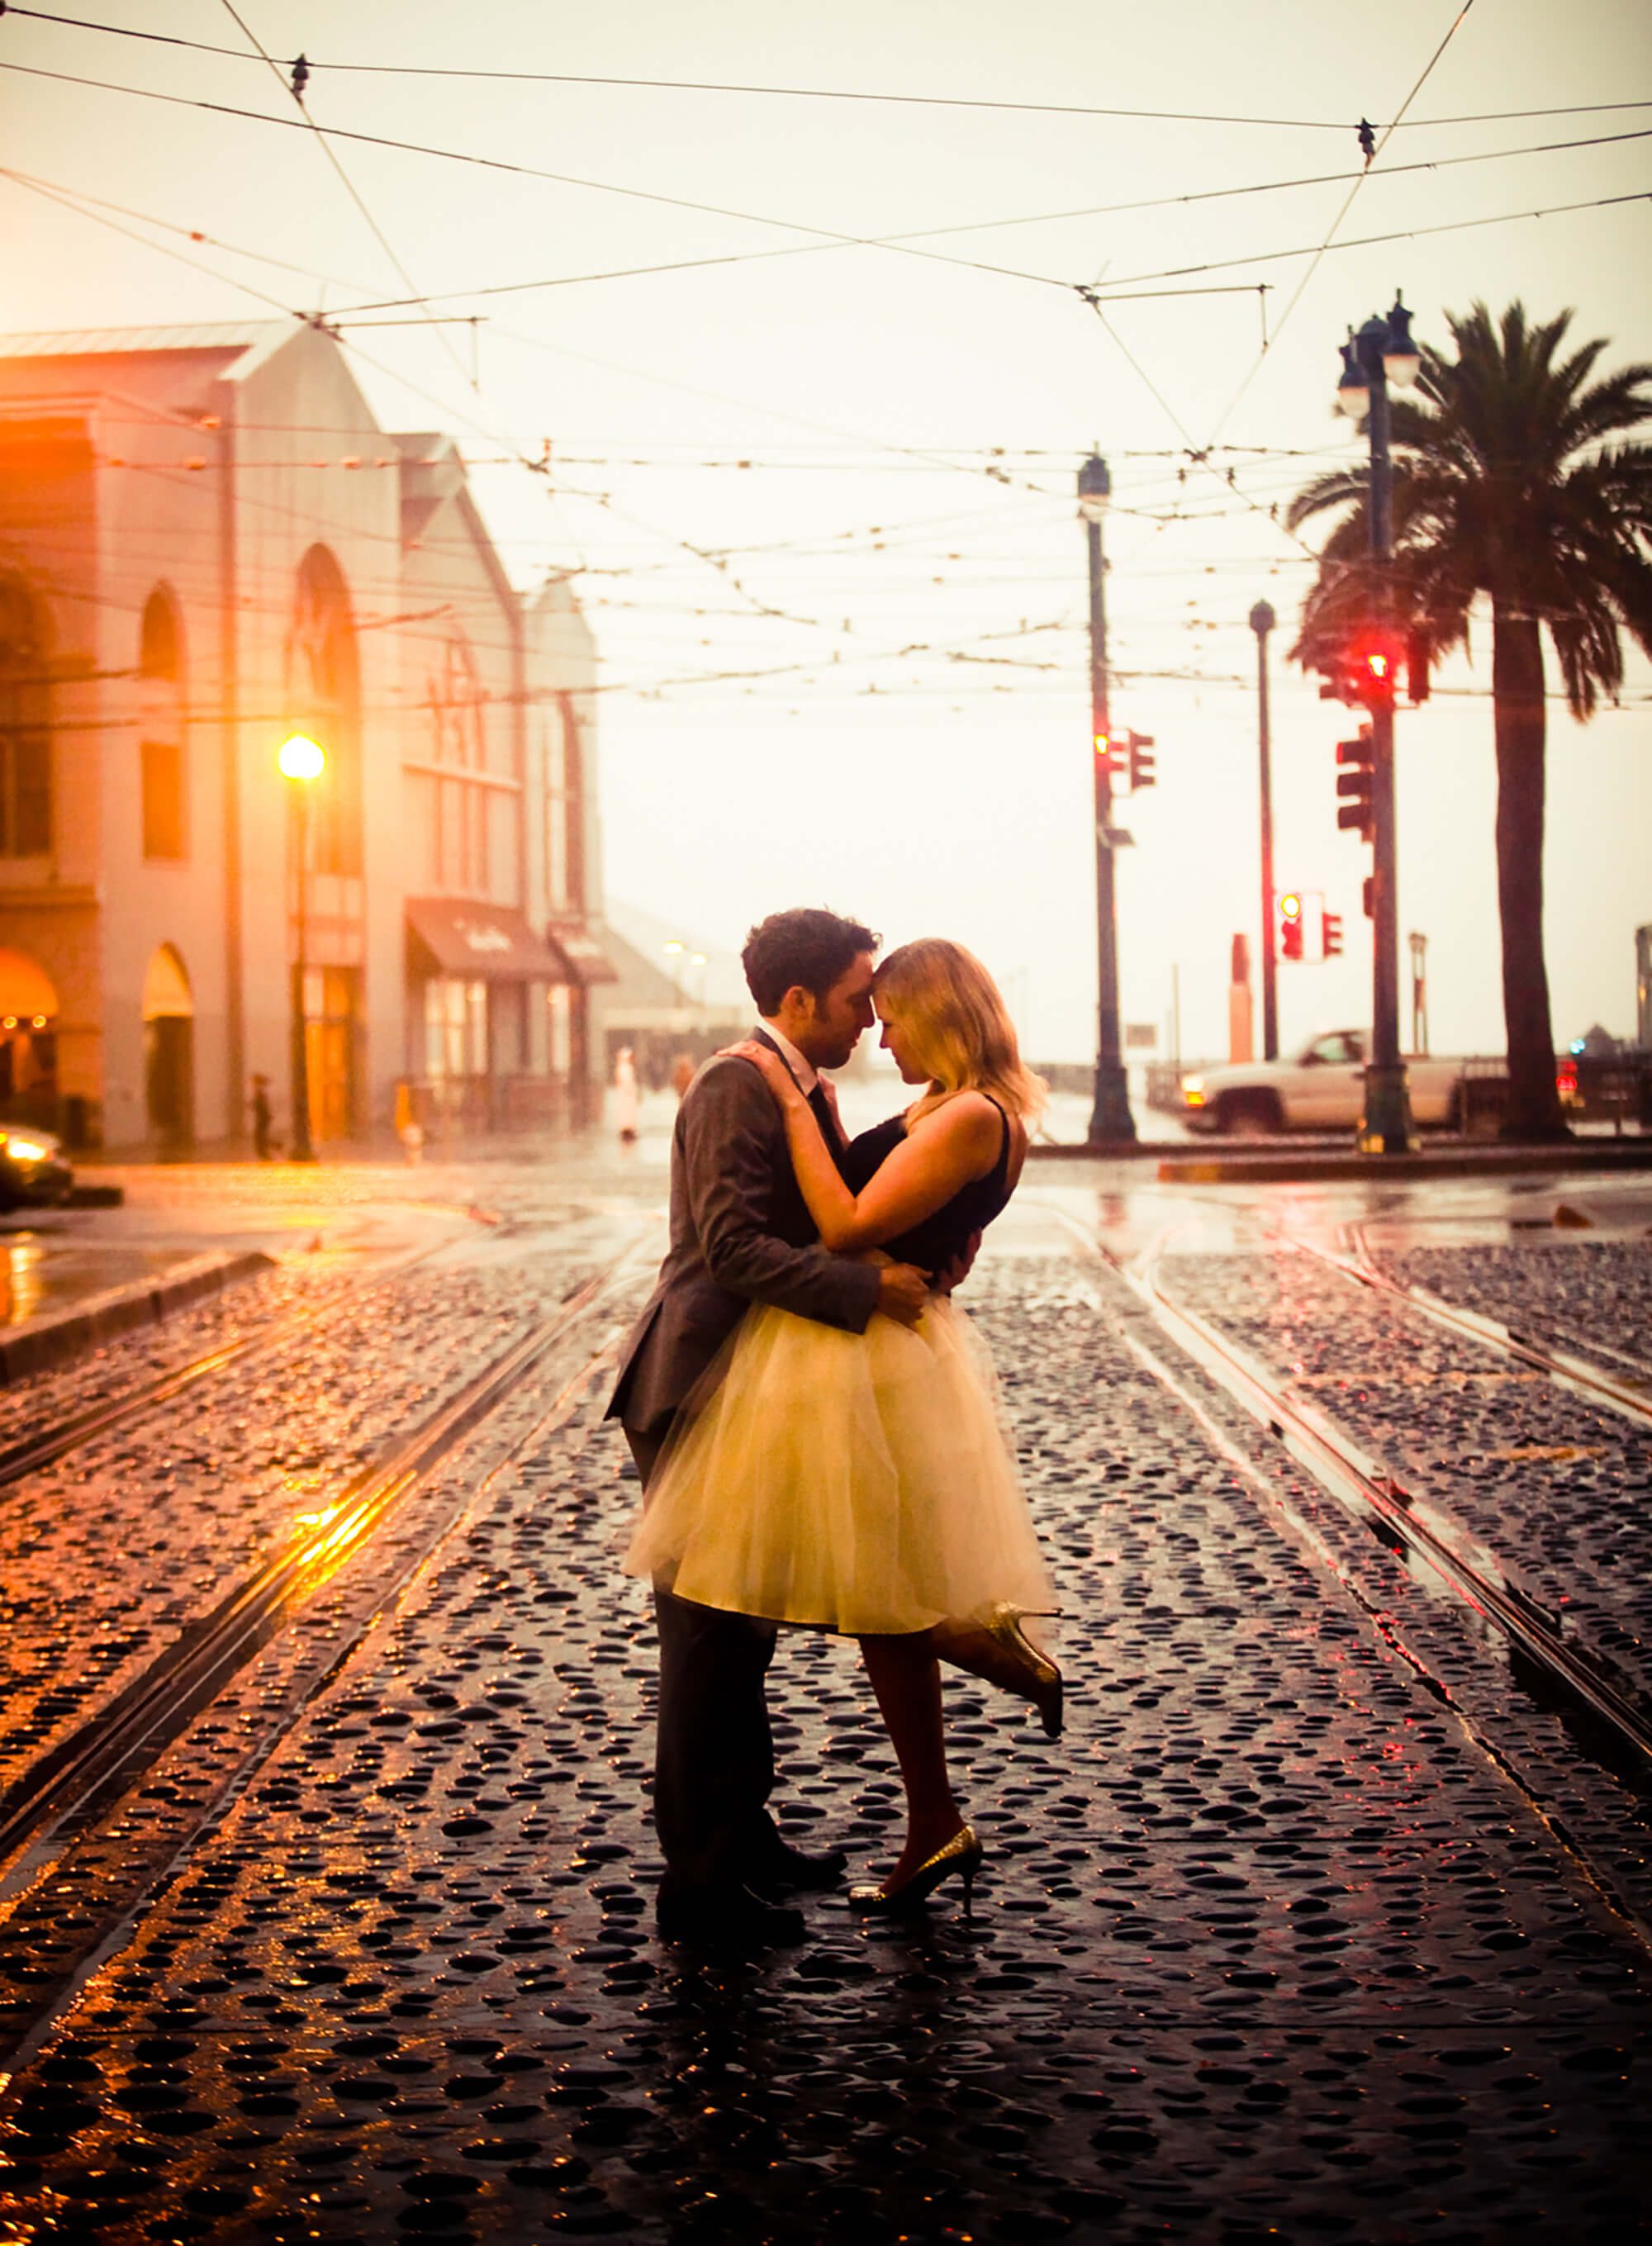 bay area engagement photographer - couple at sunset on SF street